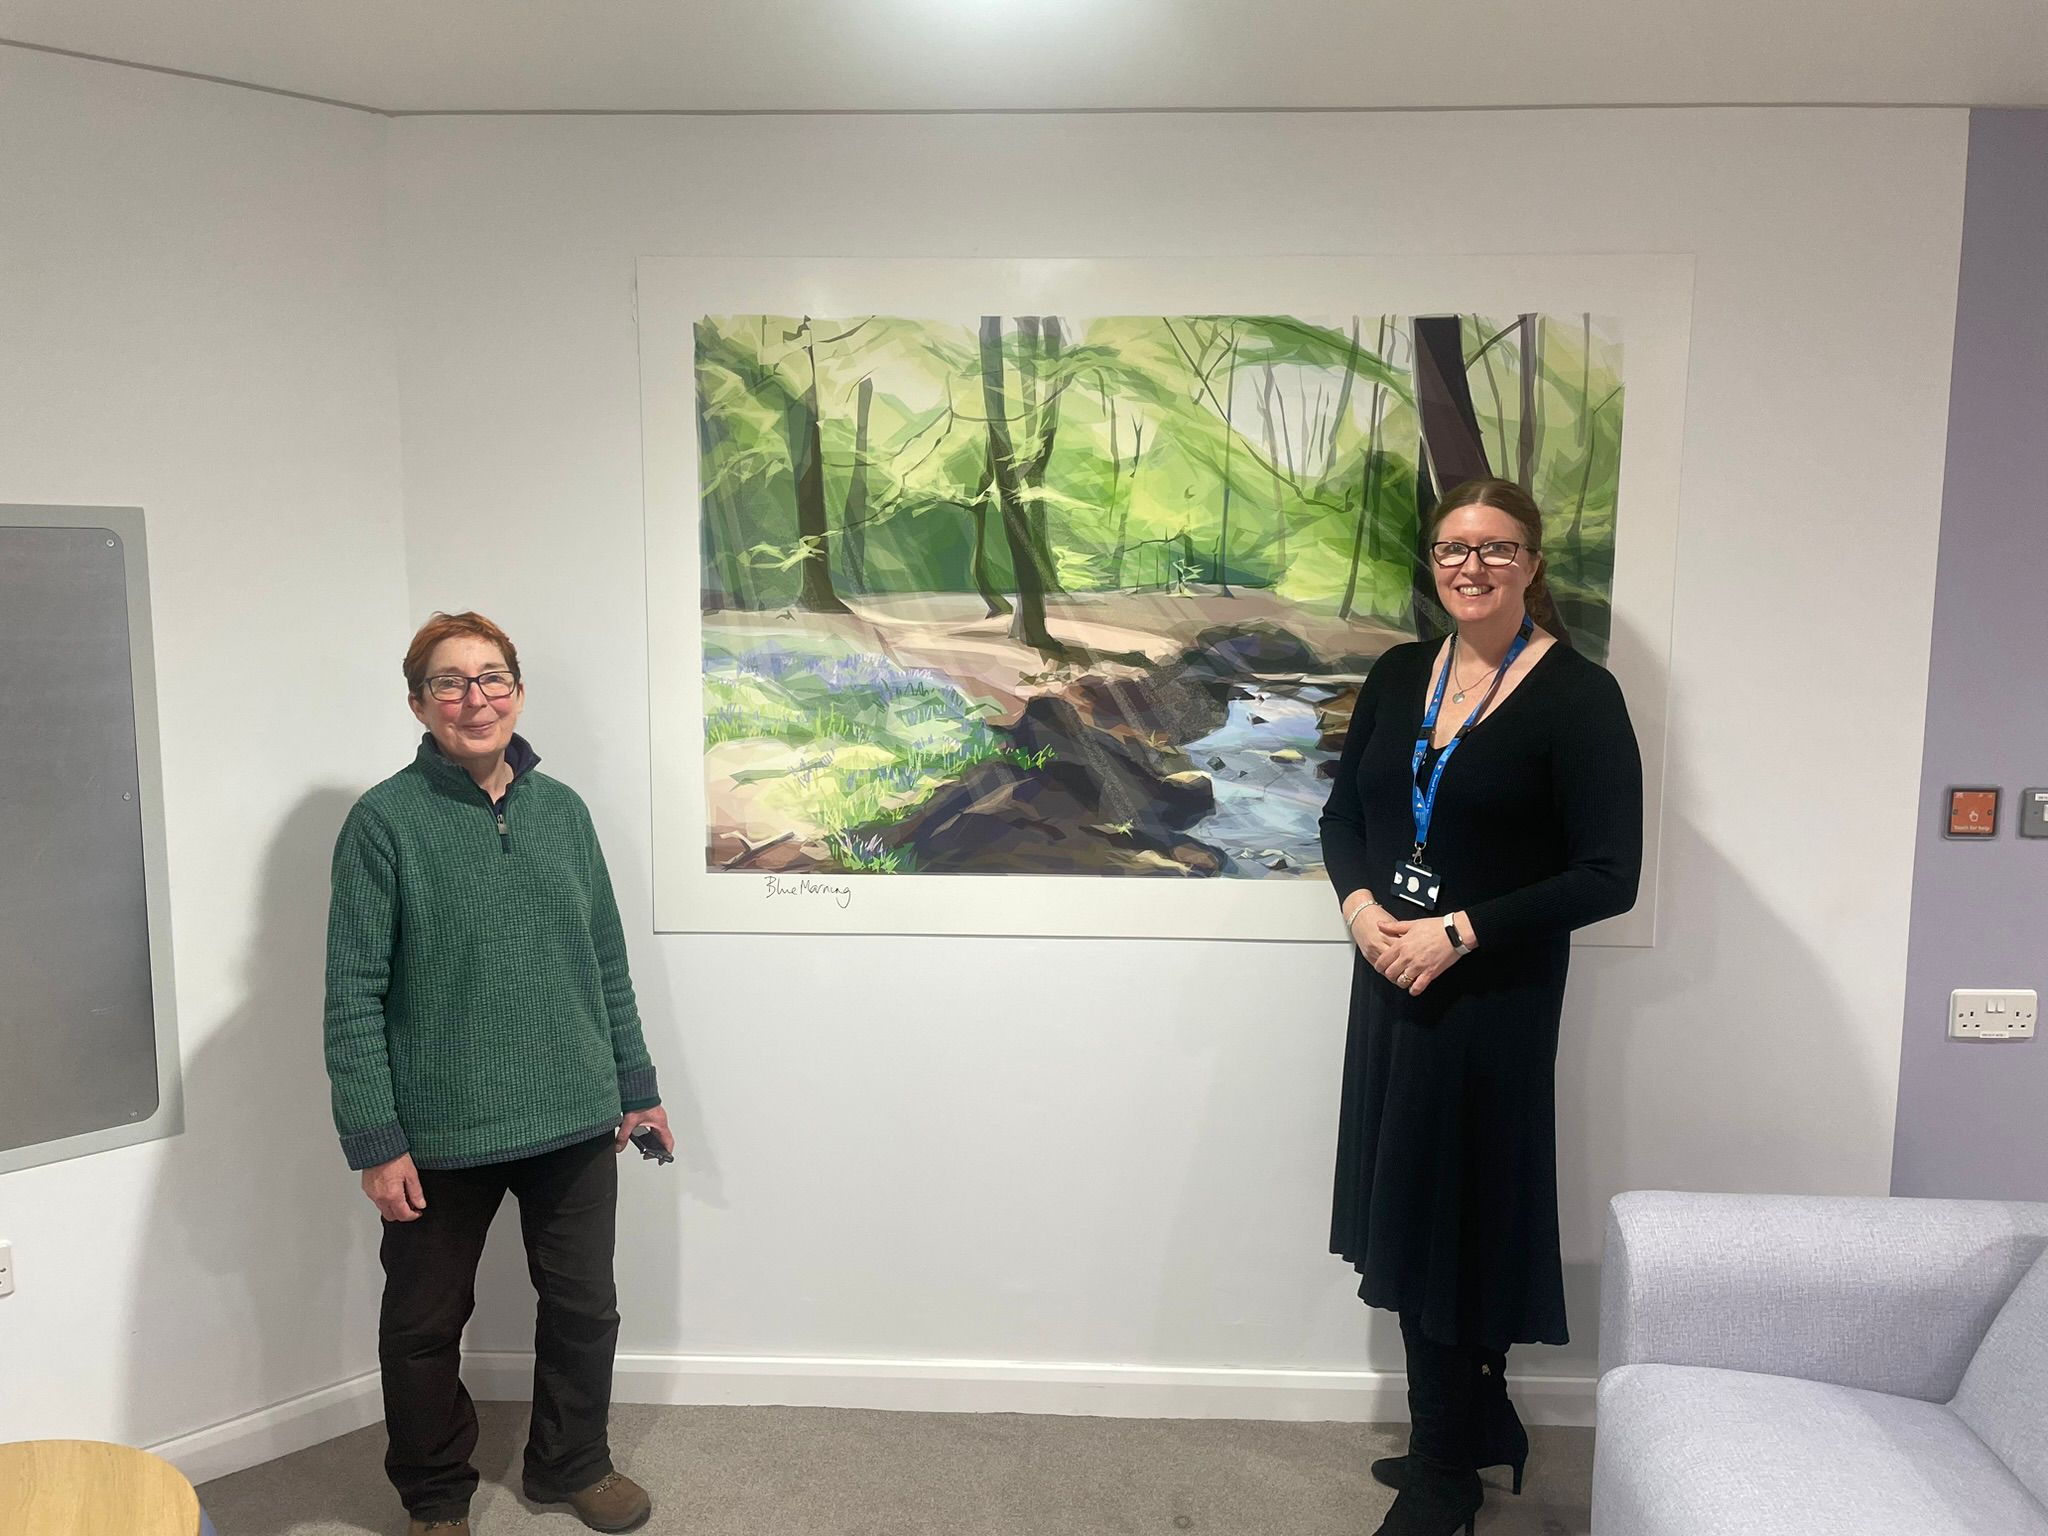 Artist, Jill Ray, and Sharon Mays, chair, stand in front of a work of art on a wall